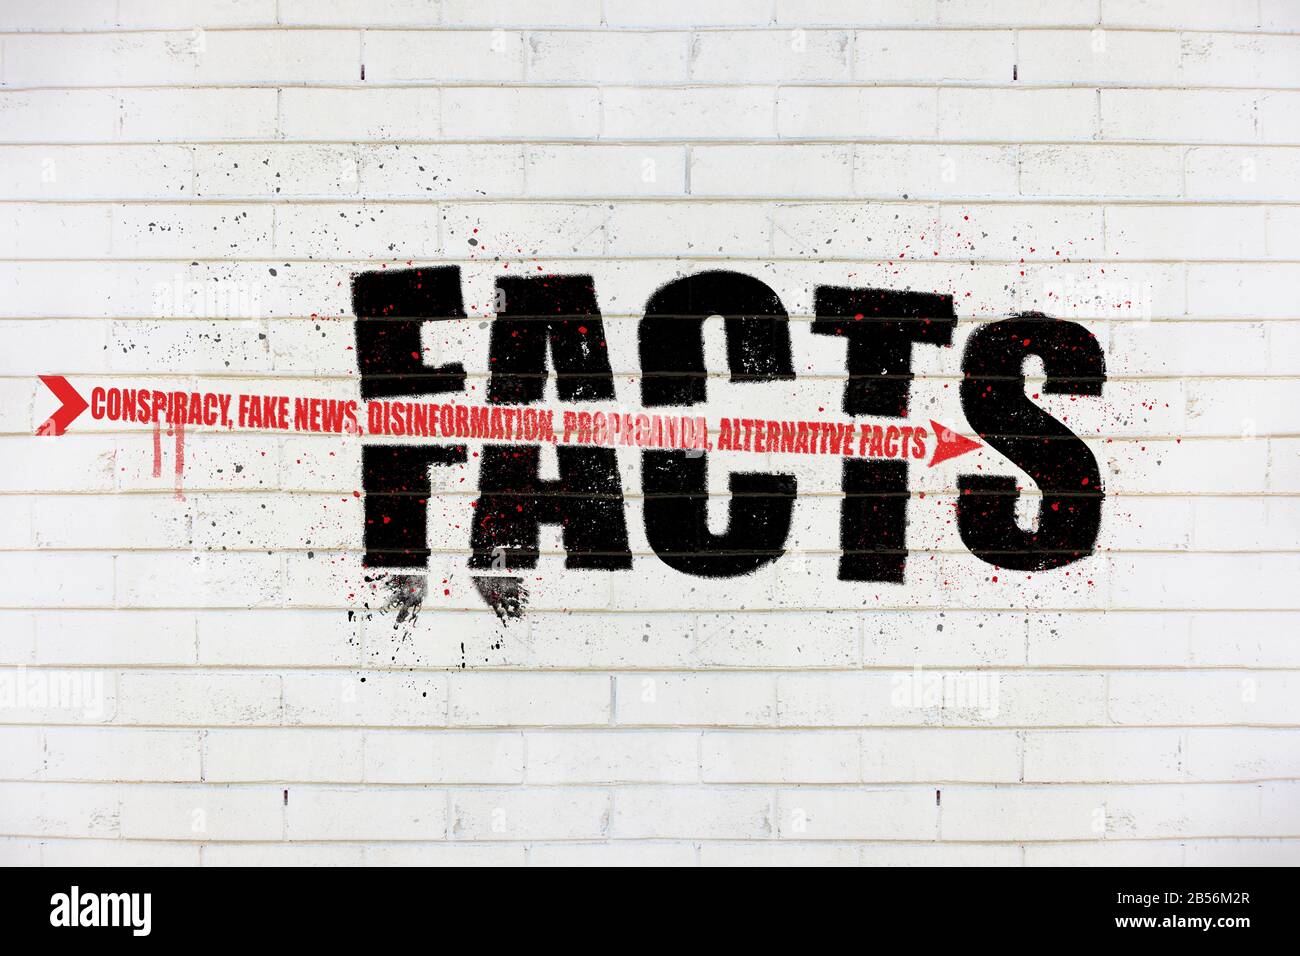 The word Facts with an arrow of conspiracy, fake news, disinformation, propaganda, alternative facts, painted on old white wall, facts being destroyed Stock Photo